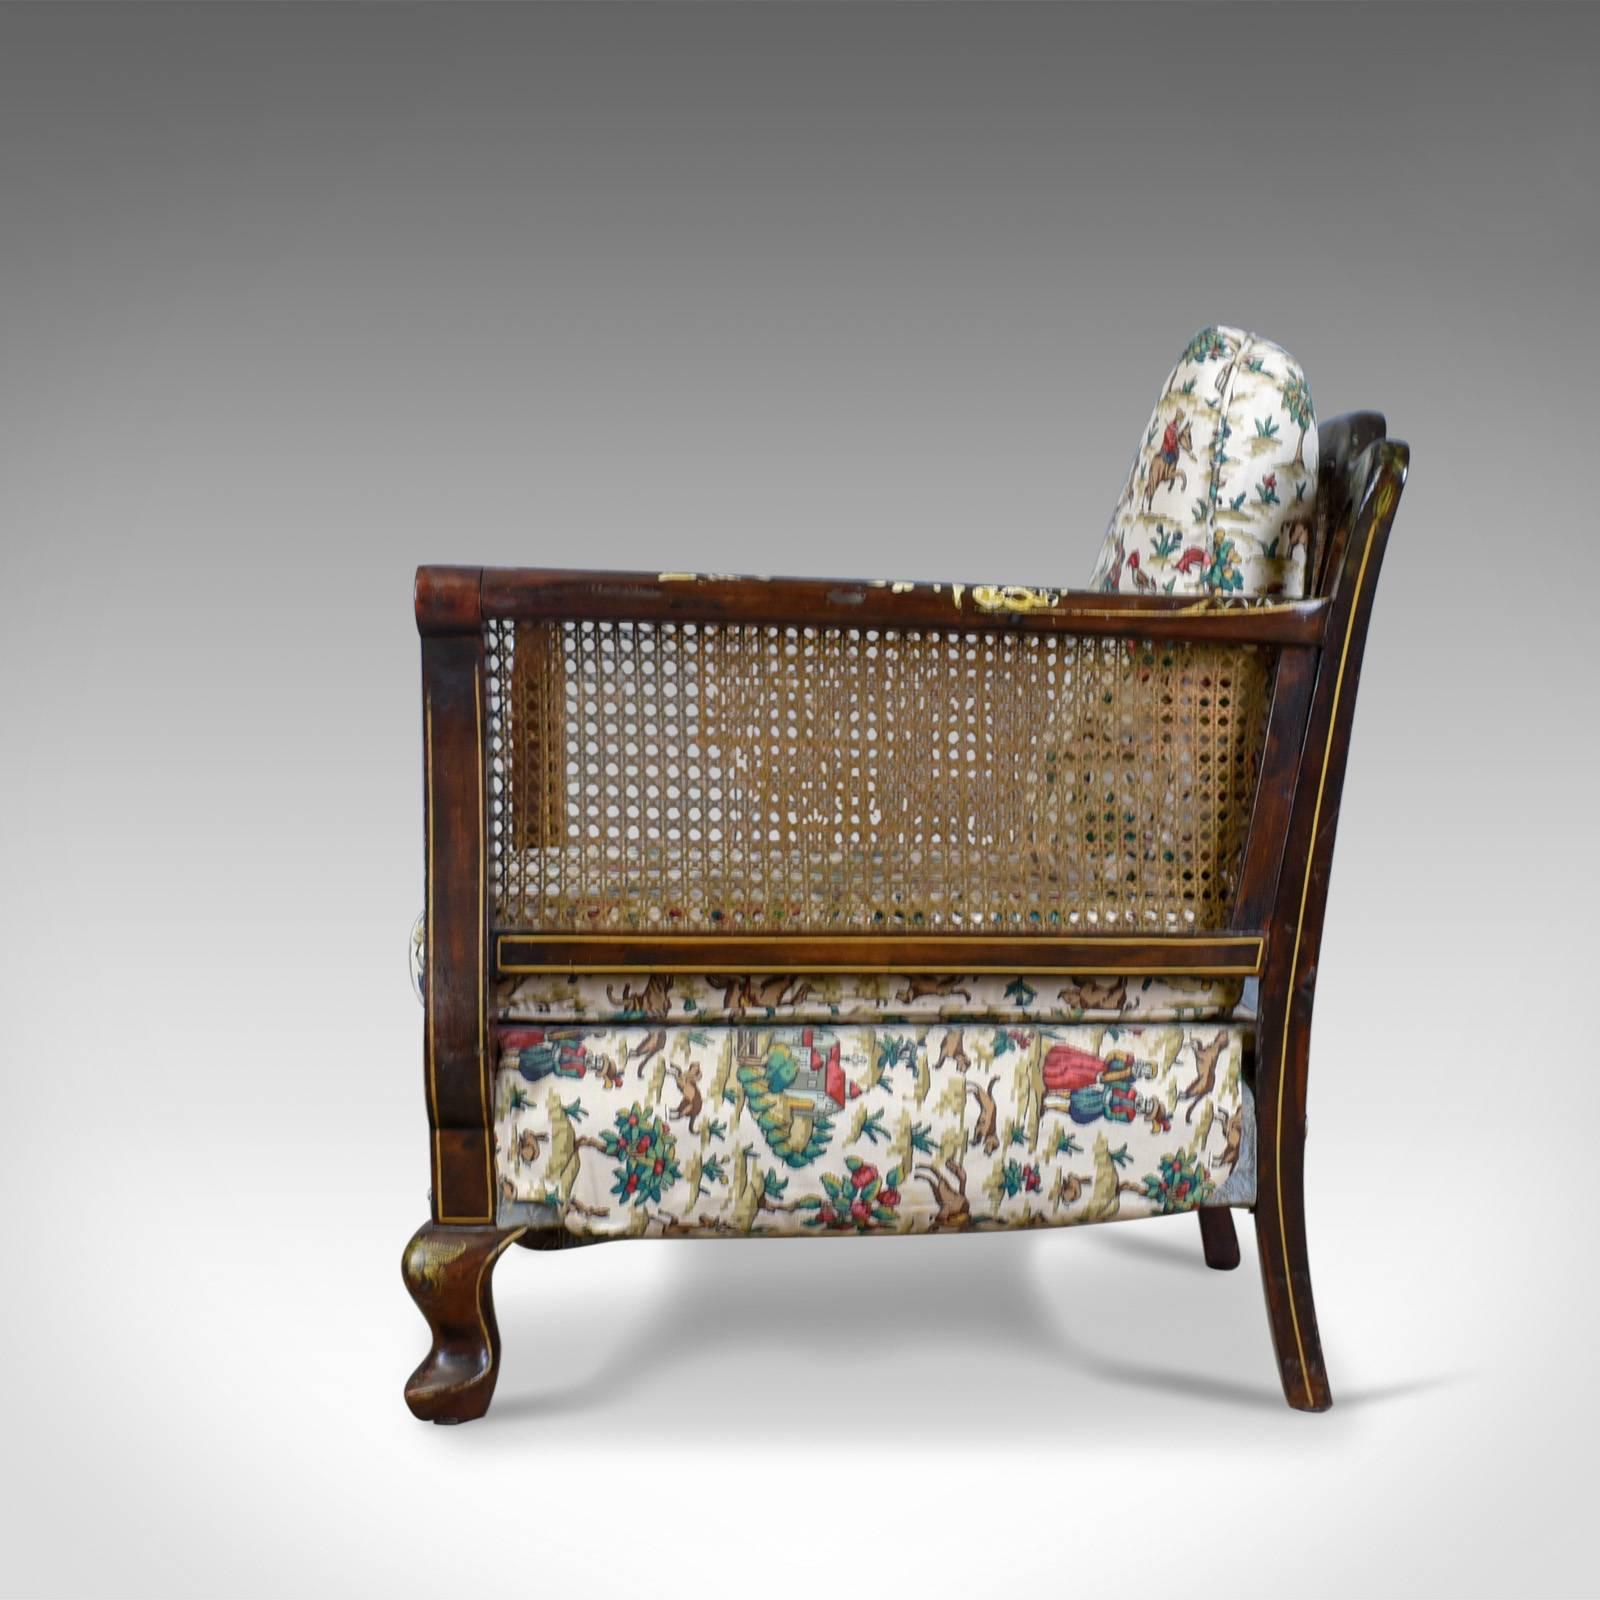 Upholstery Aesthetic Movement, Antique, Conservatory Suite, Chinoiserie, Bergère circa 1910